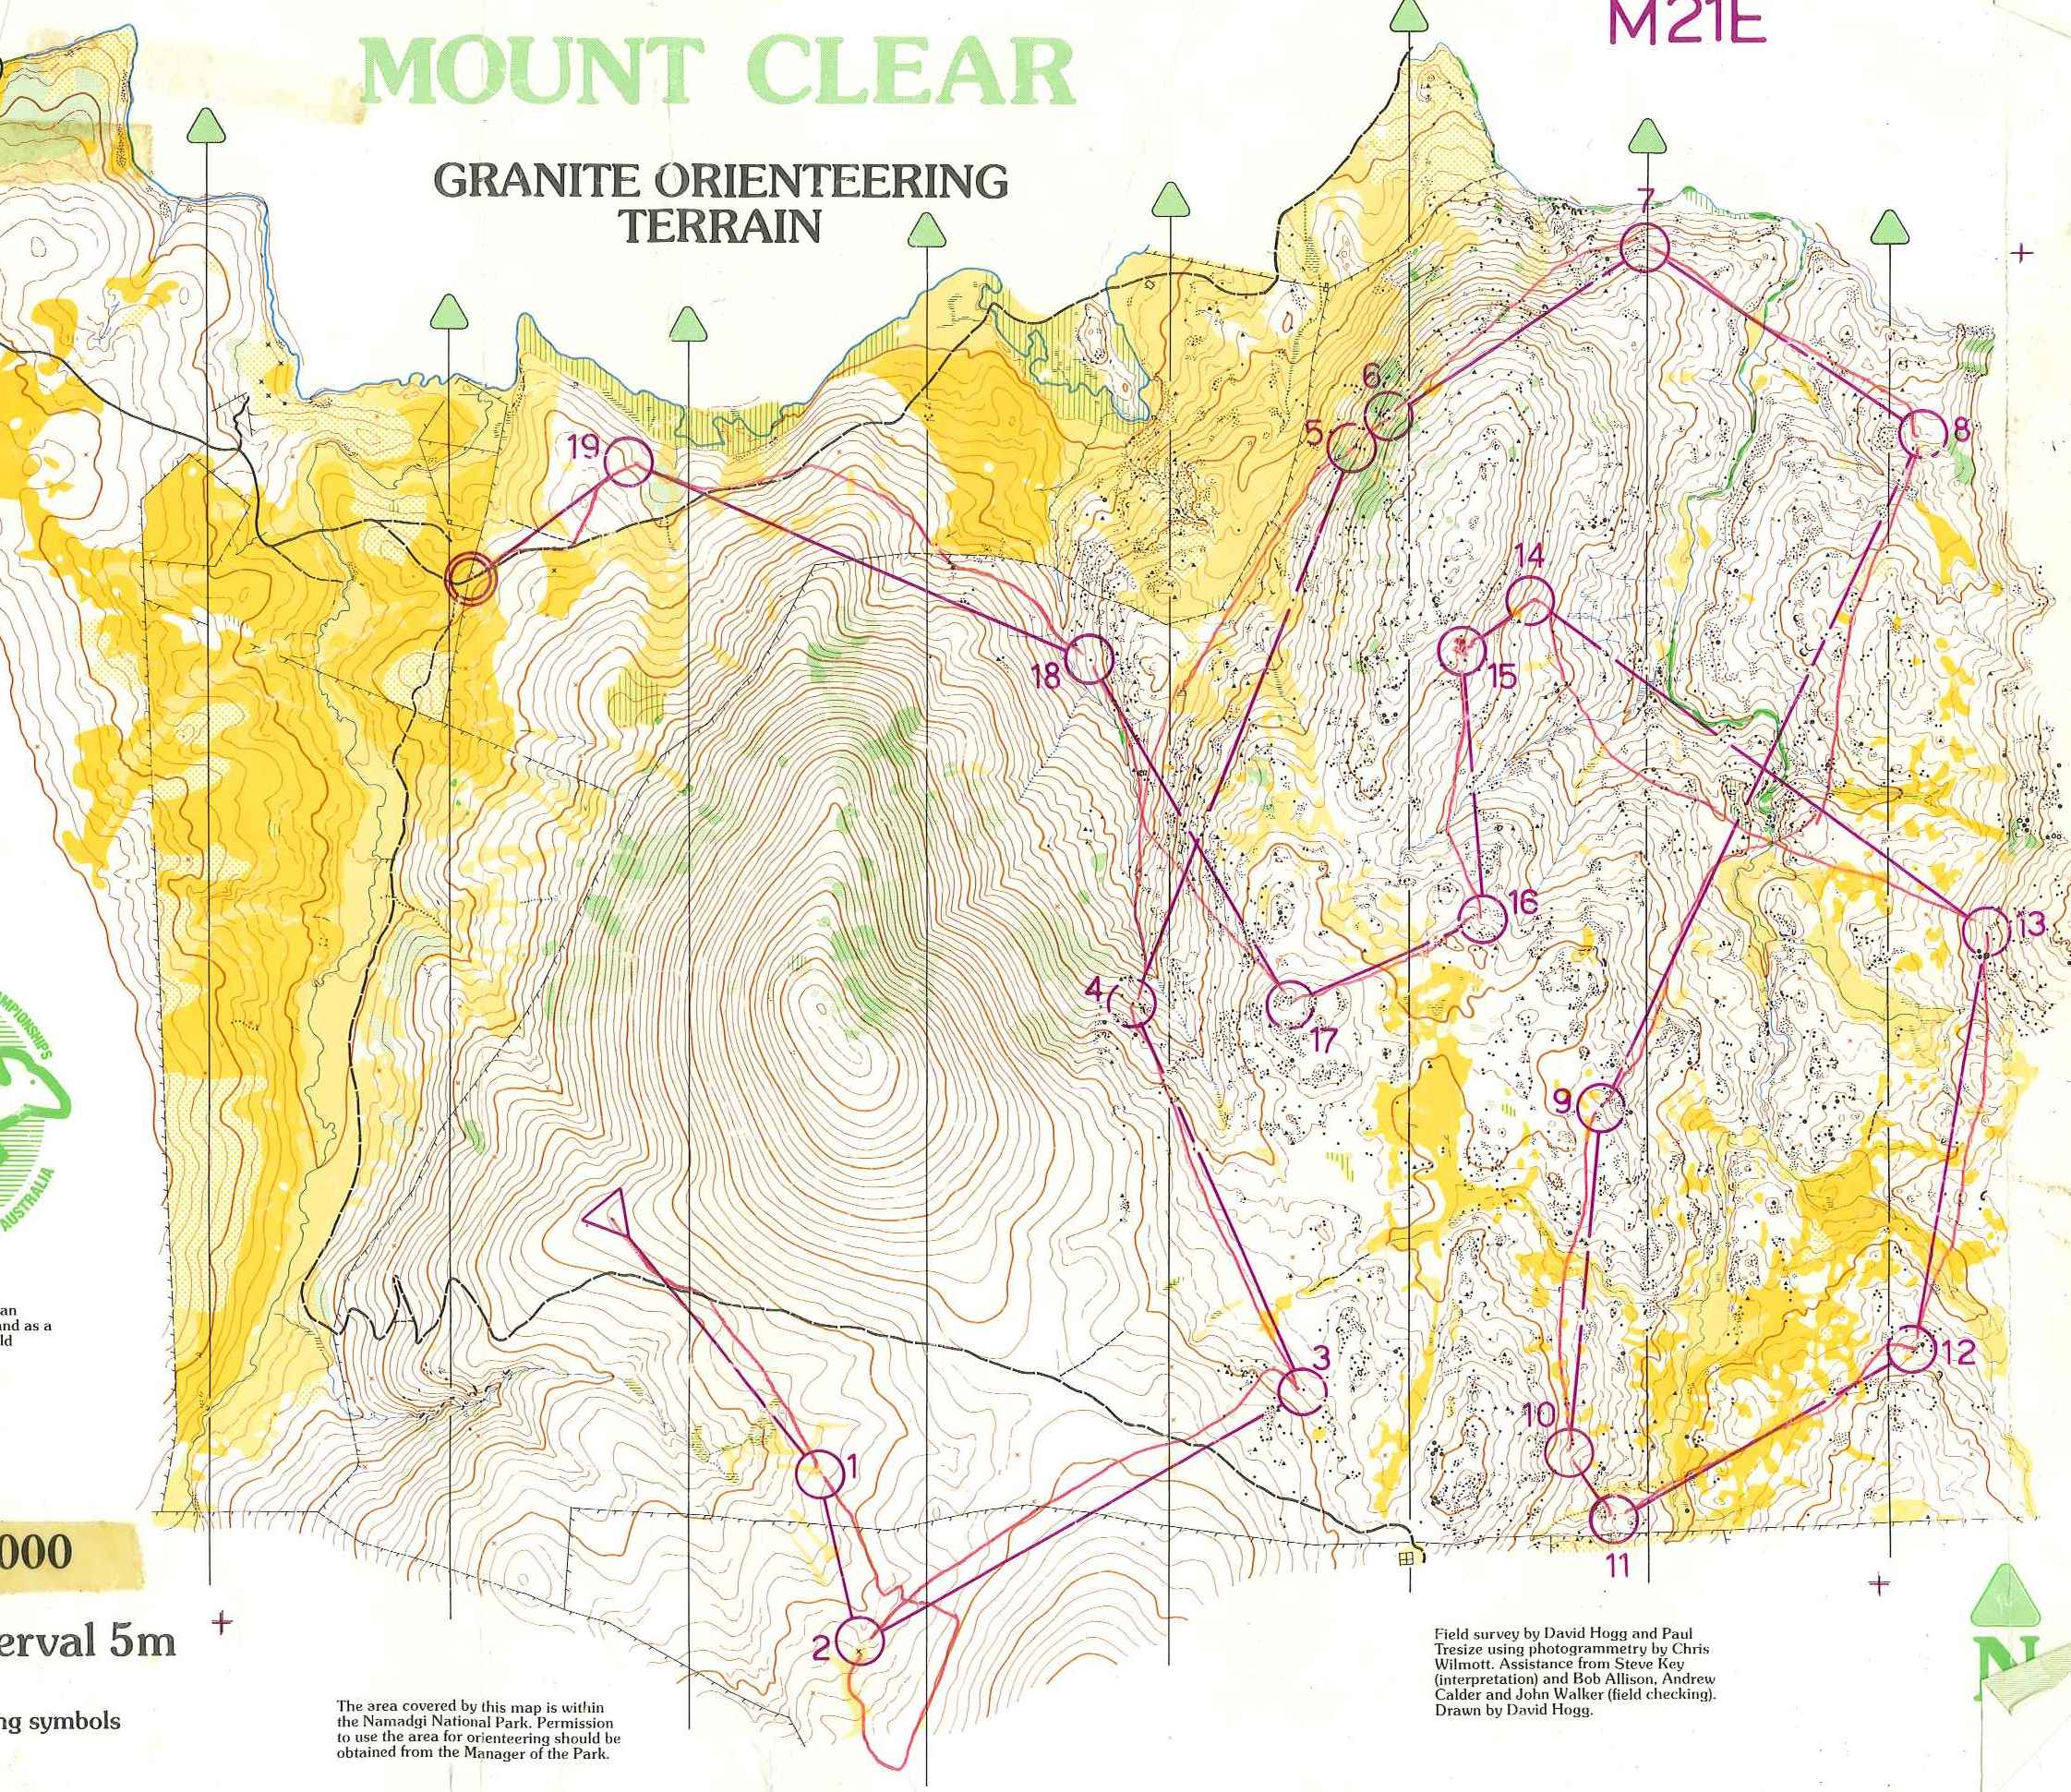 Mount Clear (31-03-1985)